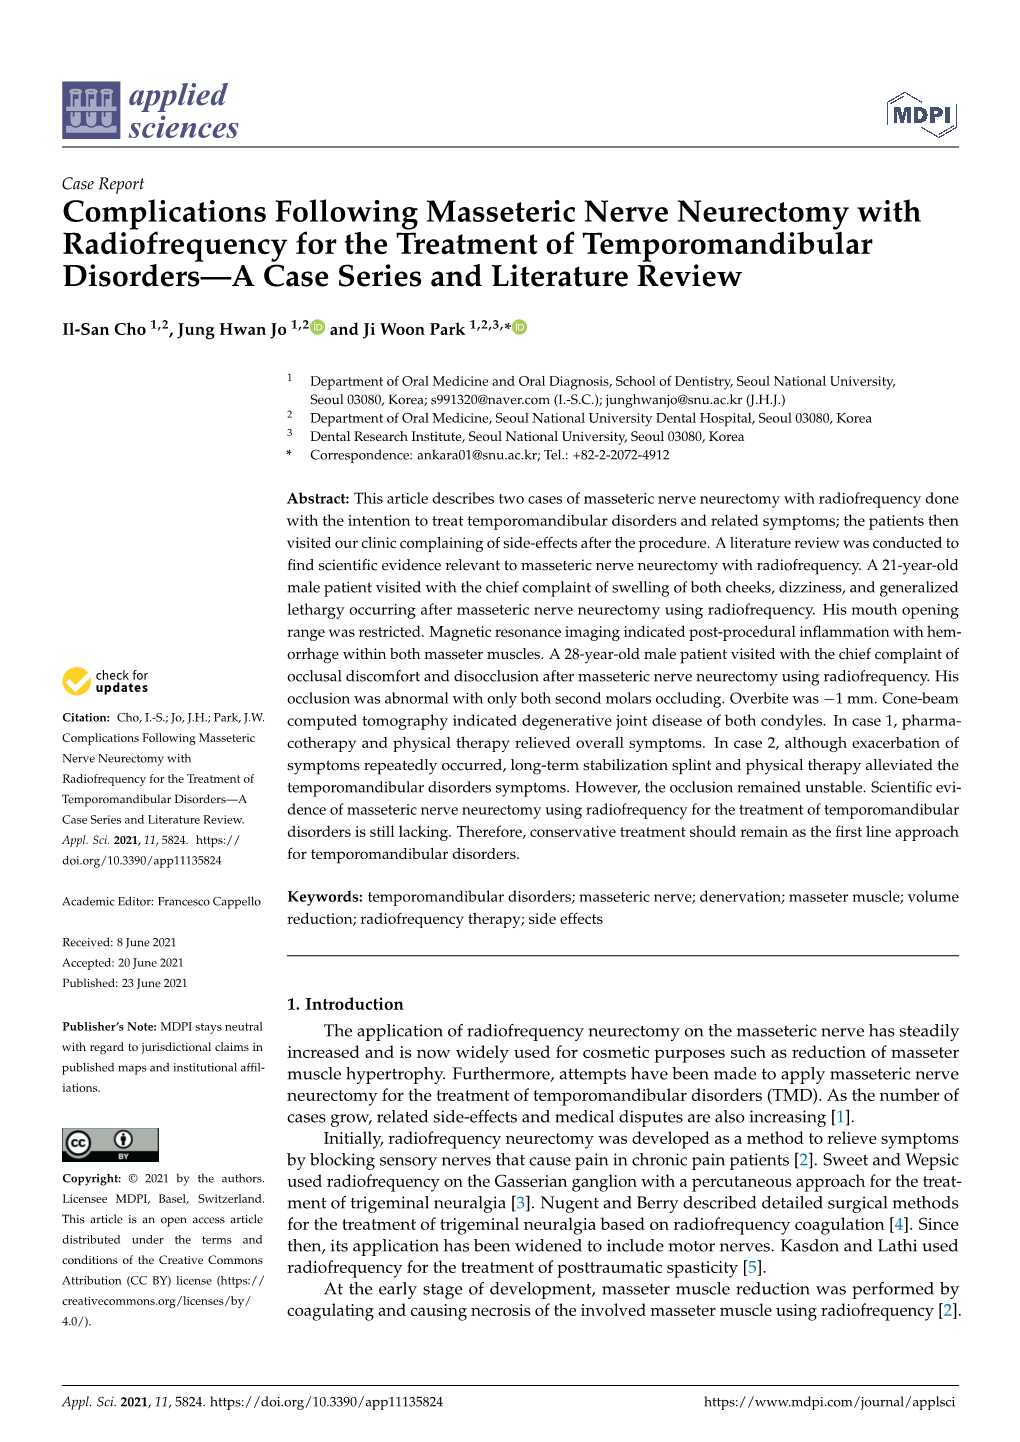 Complications Following Masseteric Nerve Neurectomy with Radiofrequency for the Treatment of Temporomandibular Disorders—A Case Series and Literature Review